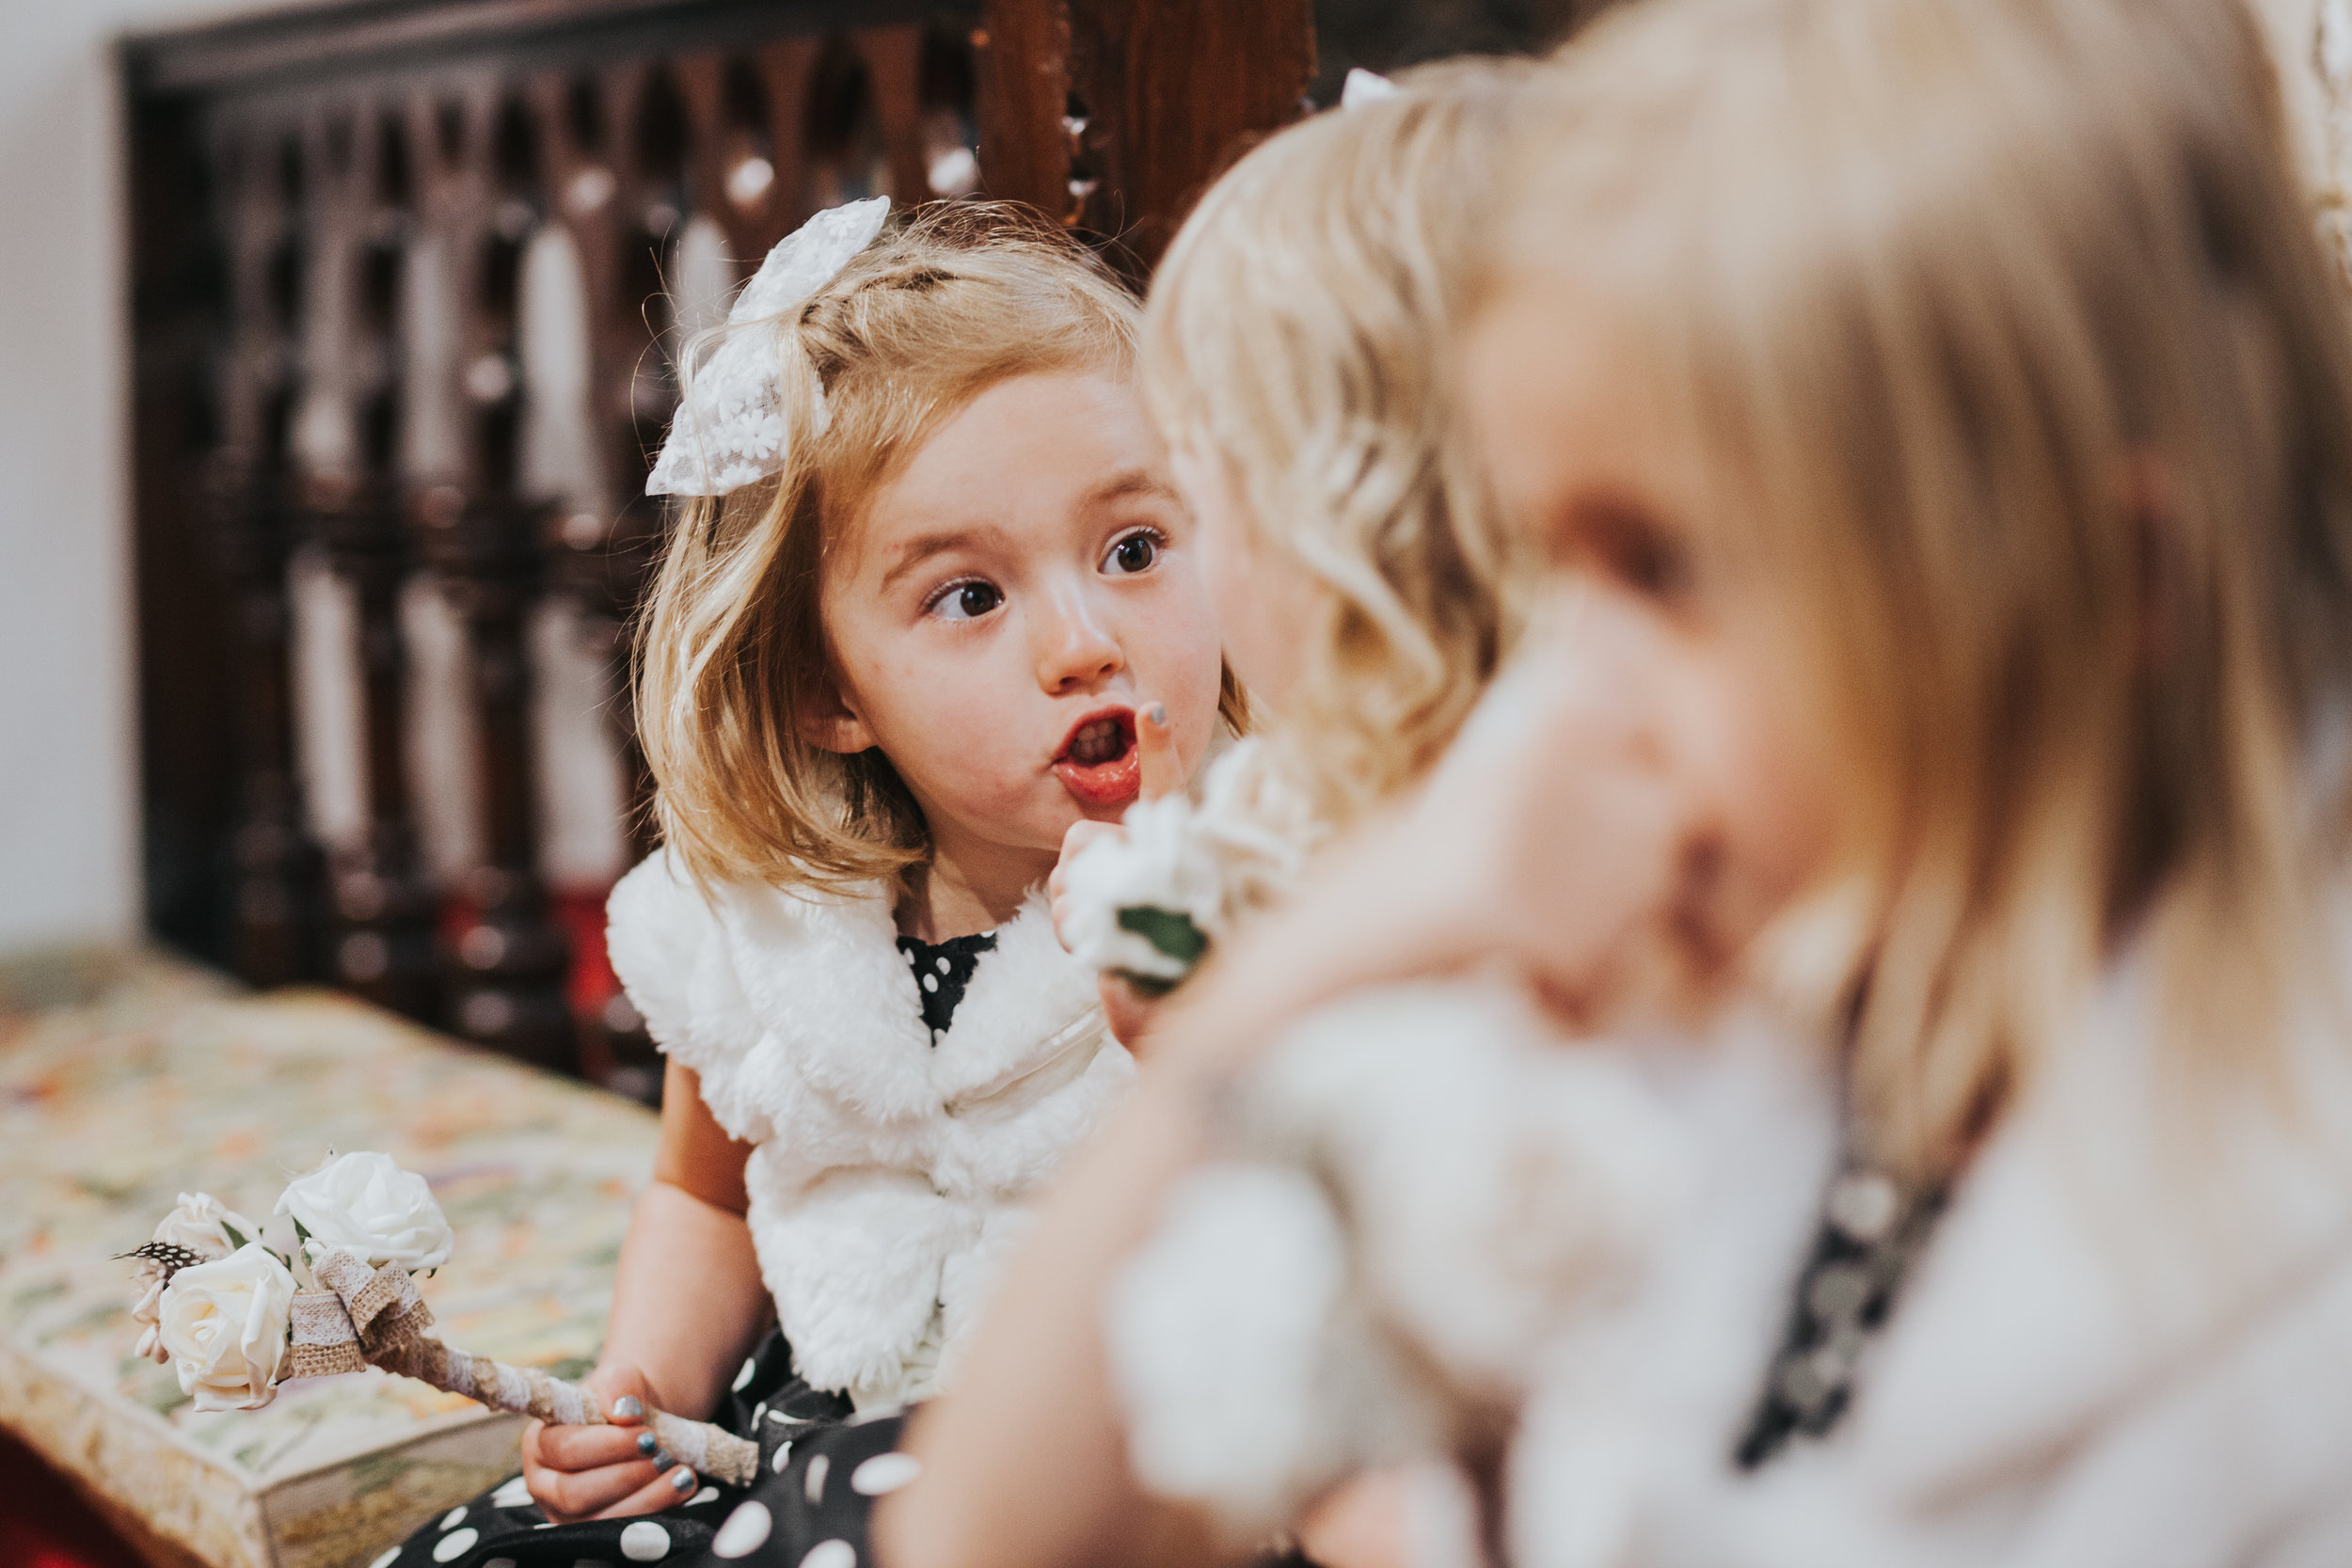  Previously grumpy child tells the other 2 girls to shut up during the service, with a super cute finger to lips, glare and the loudest SHHHHHHHHH ever!&nbsp; 